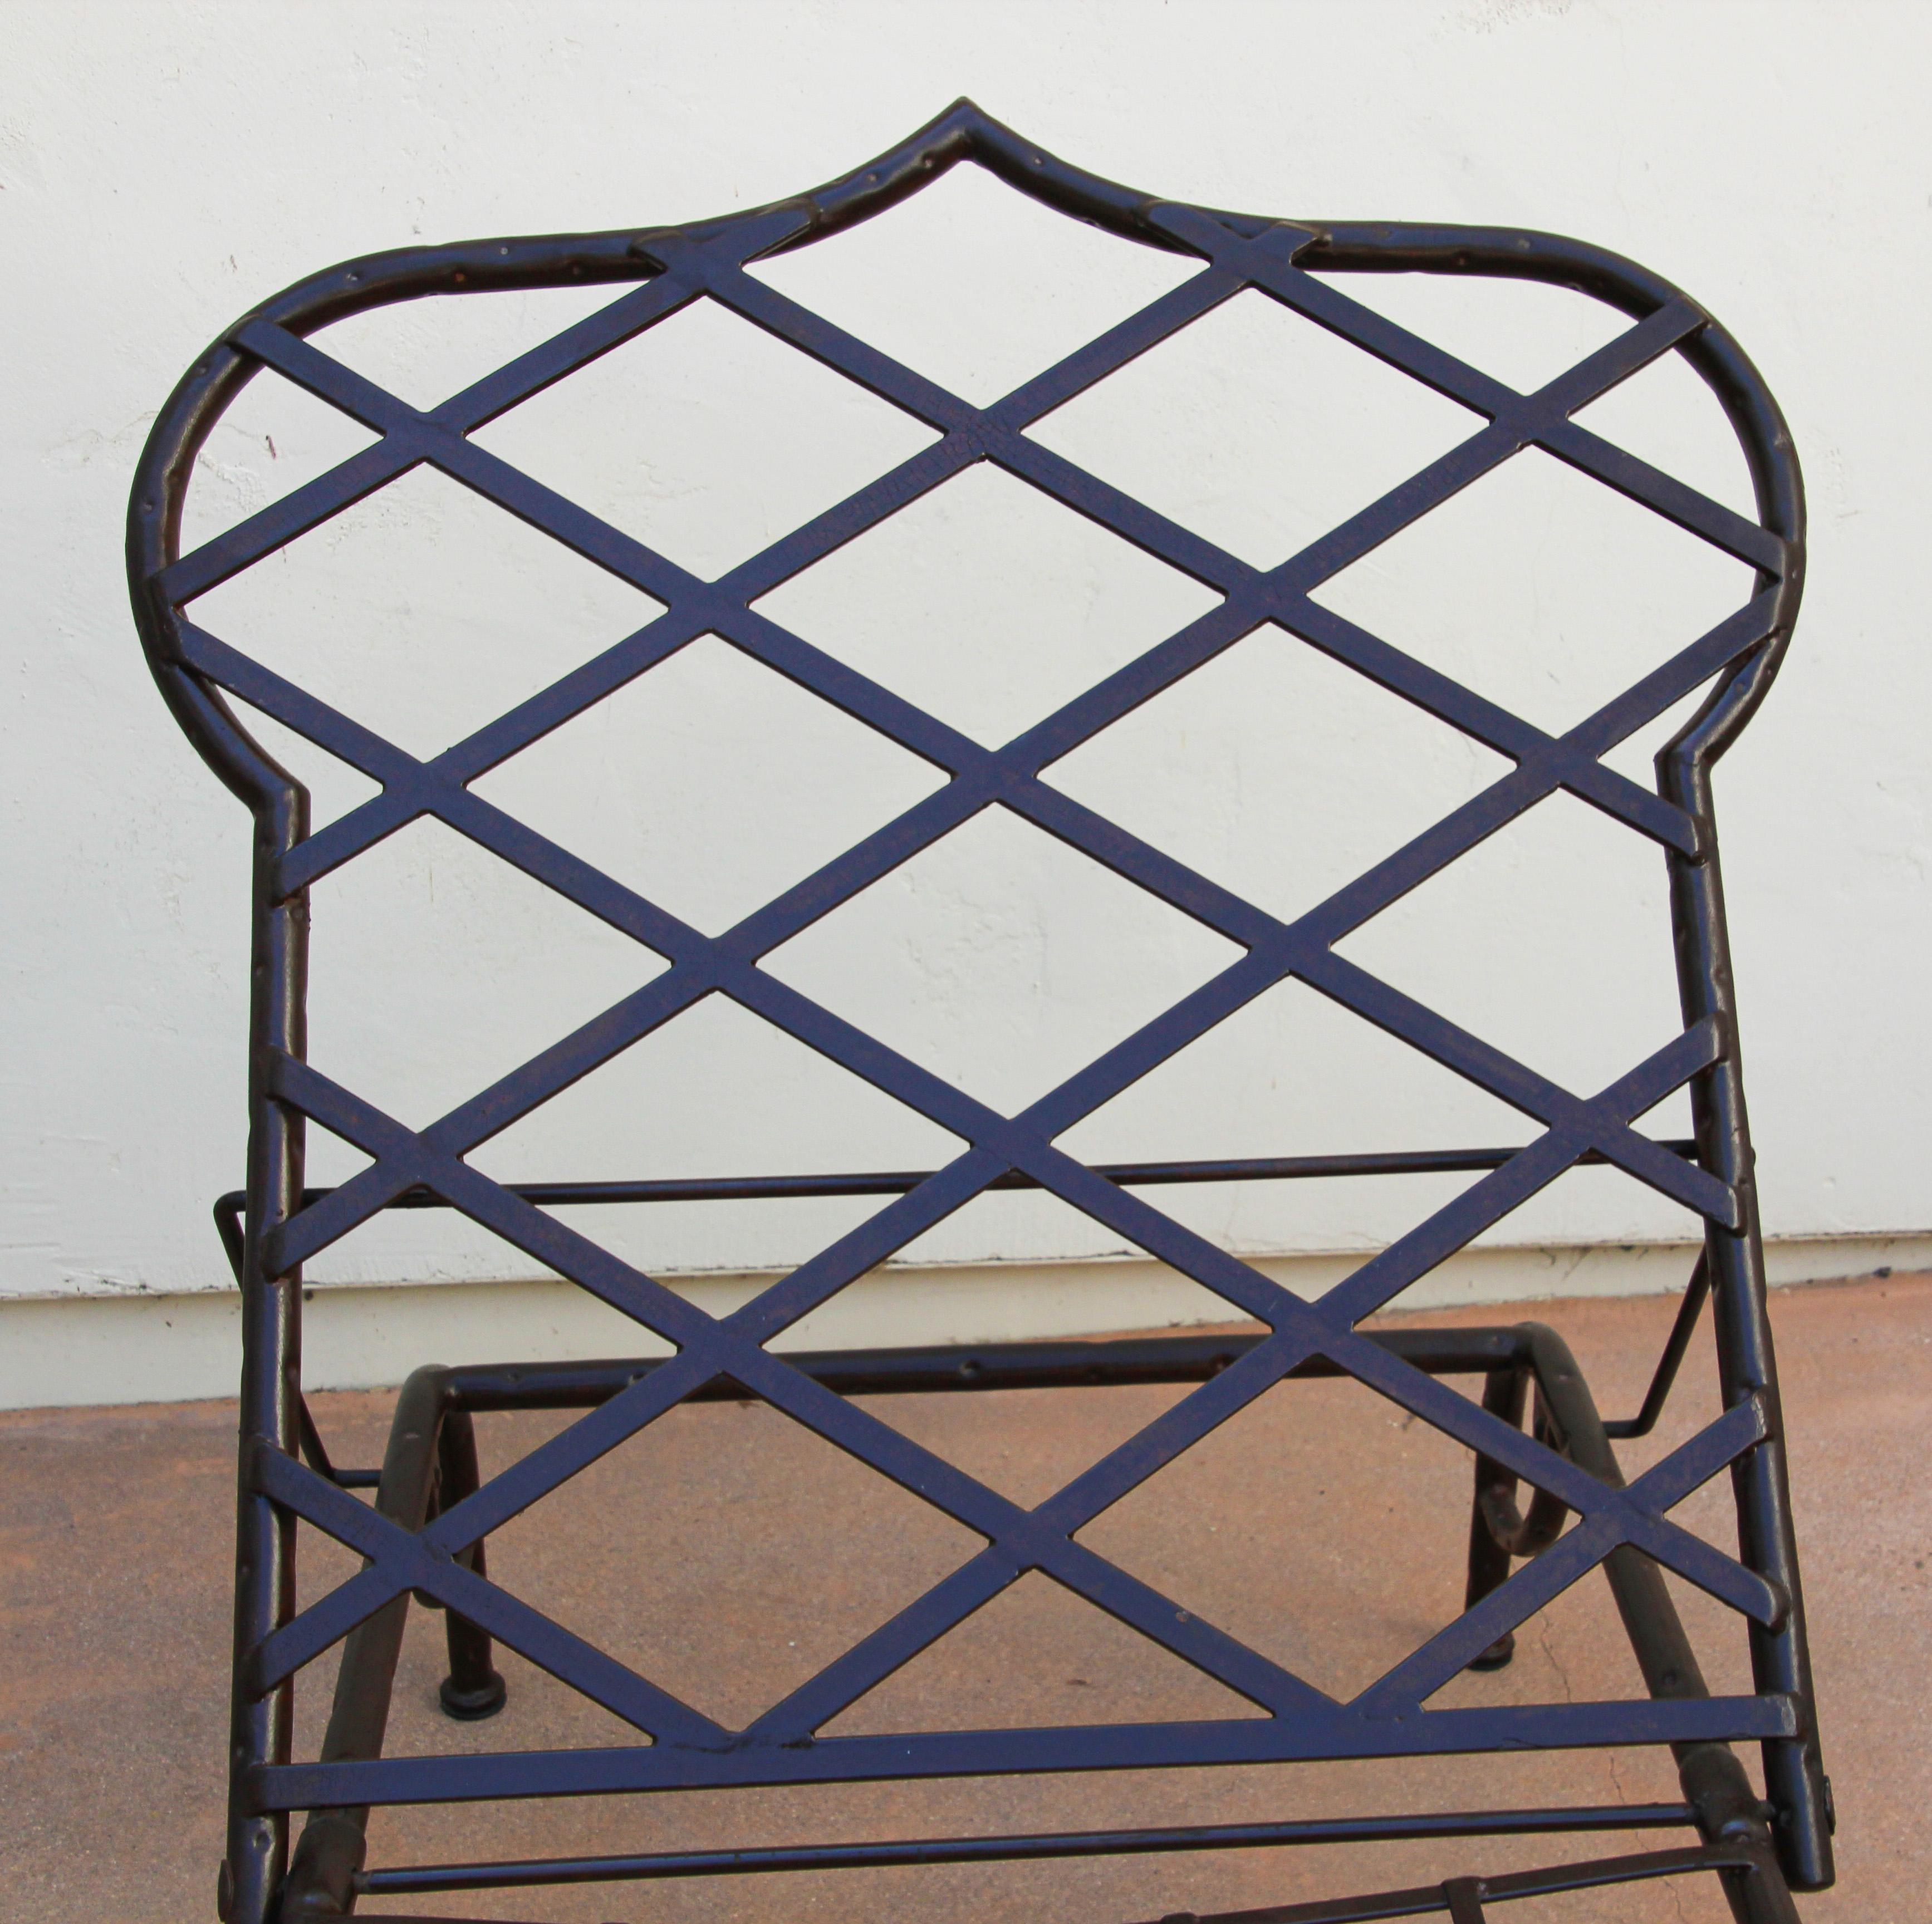 Hand-Crafted Outdoor Metal Lounge Chair in Mario Papperzini Style Moorish Backrest Design